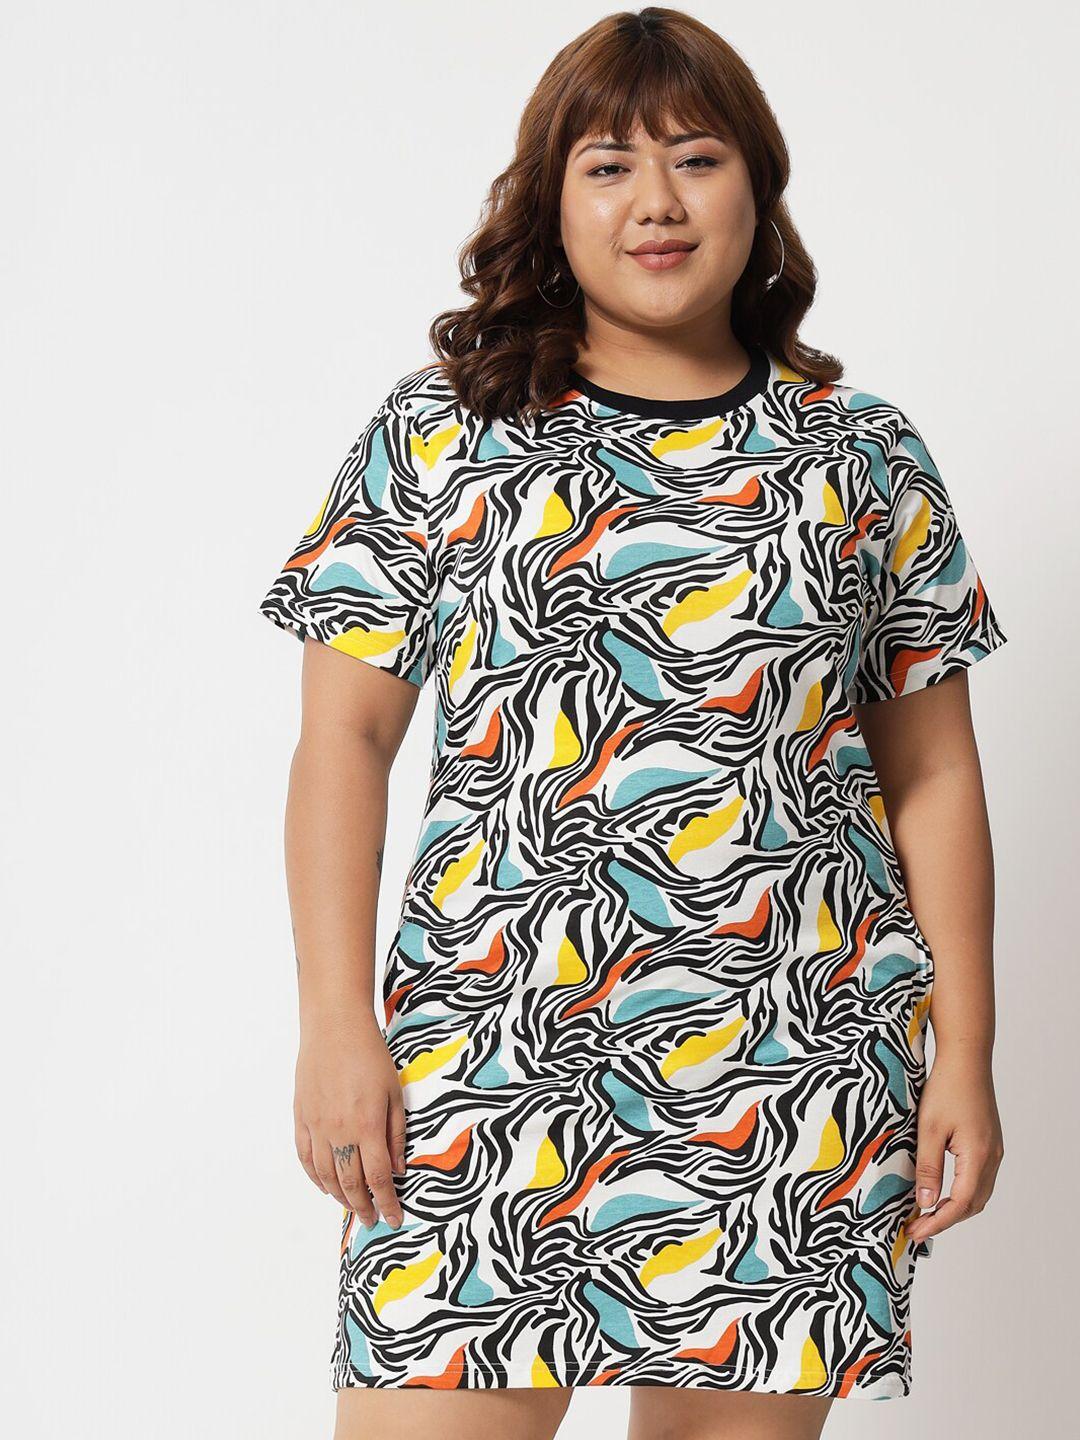 beyound size - the dry state multicoloured printed t-shirt style dress